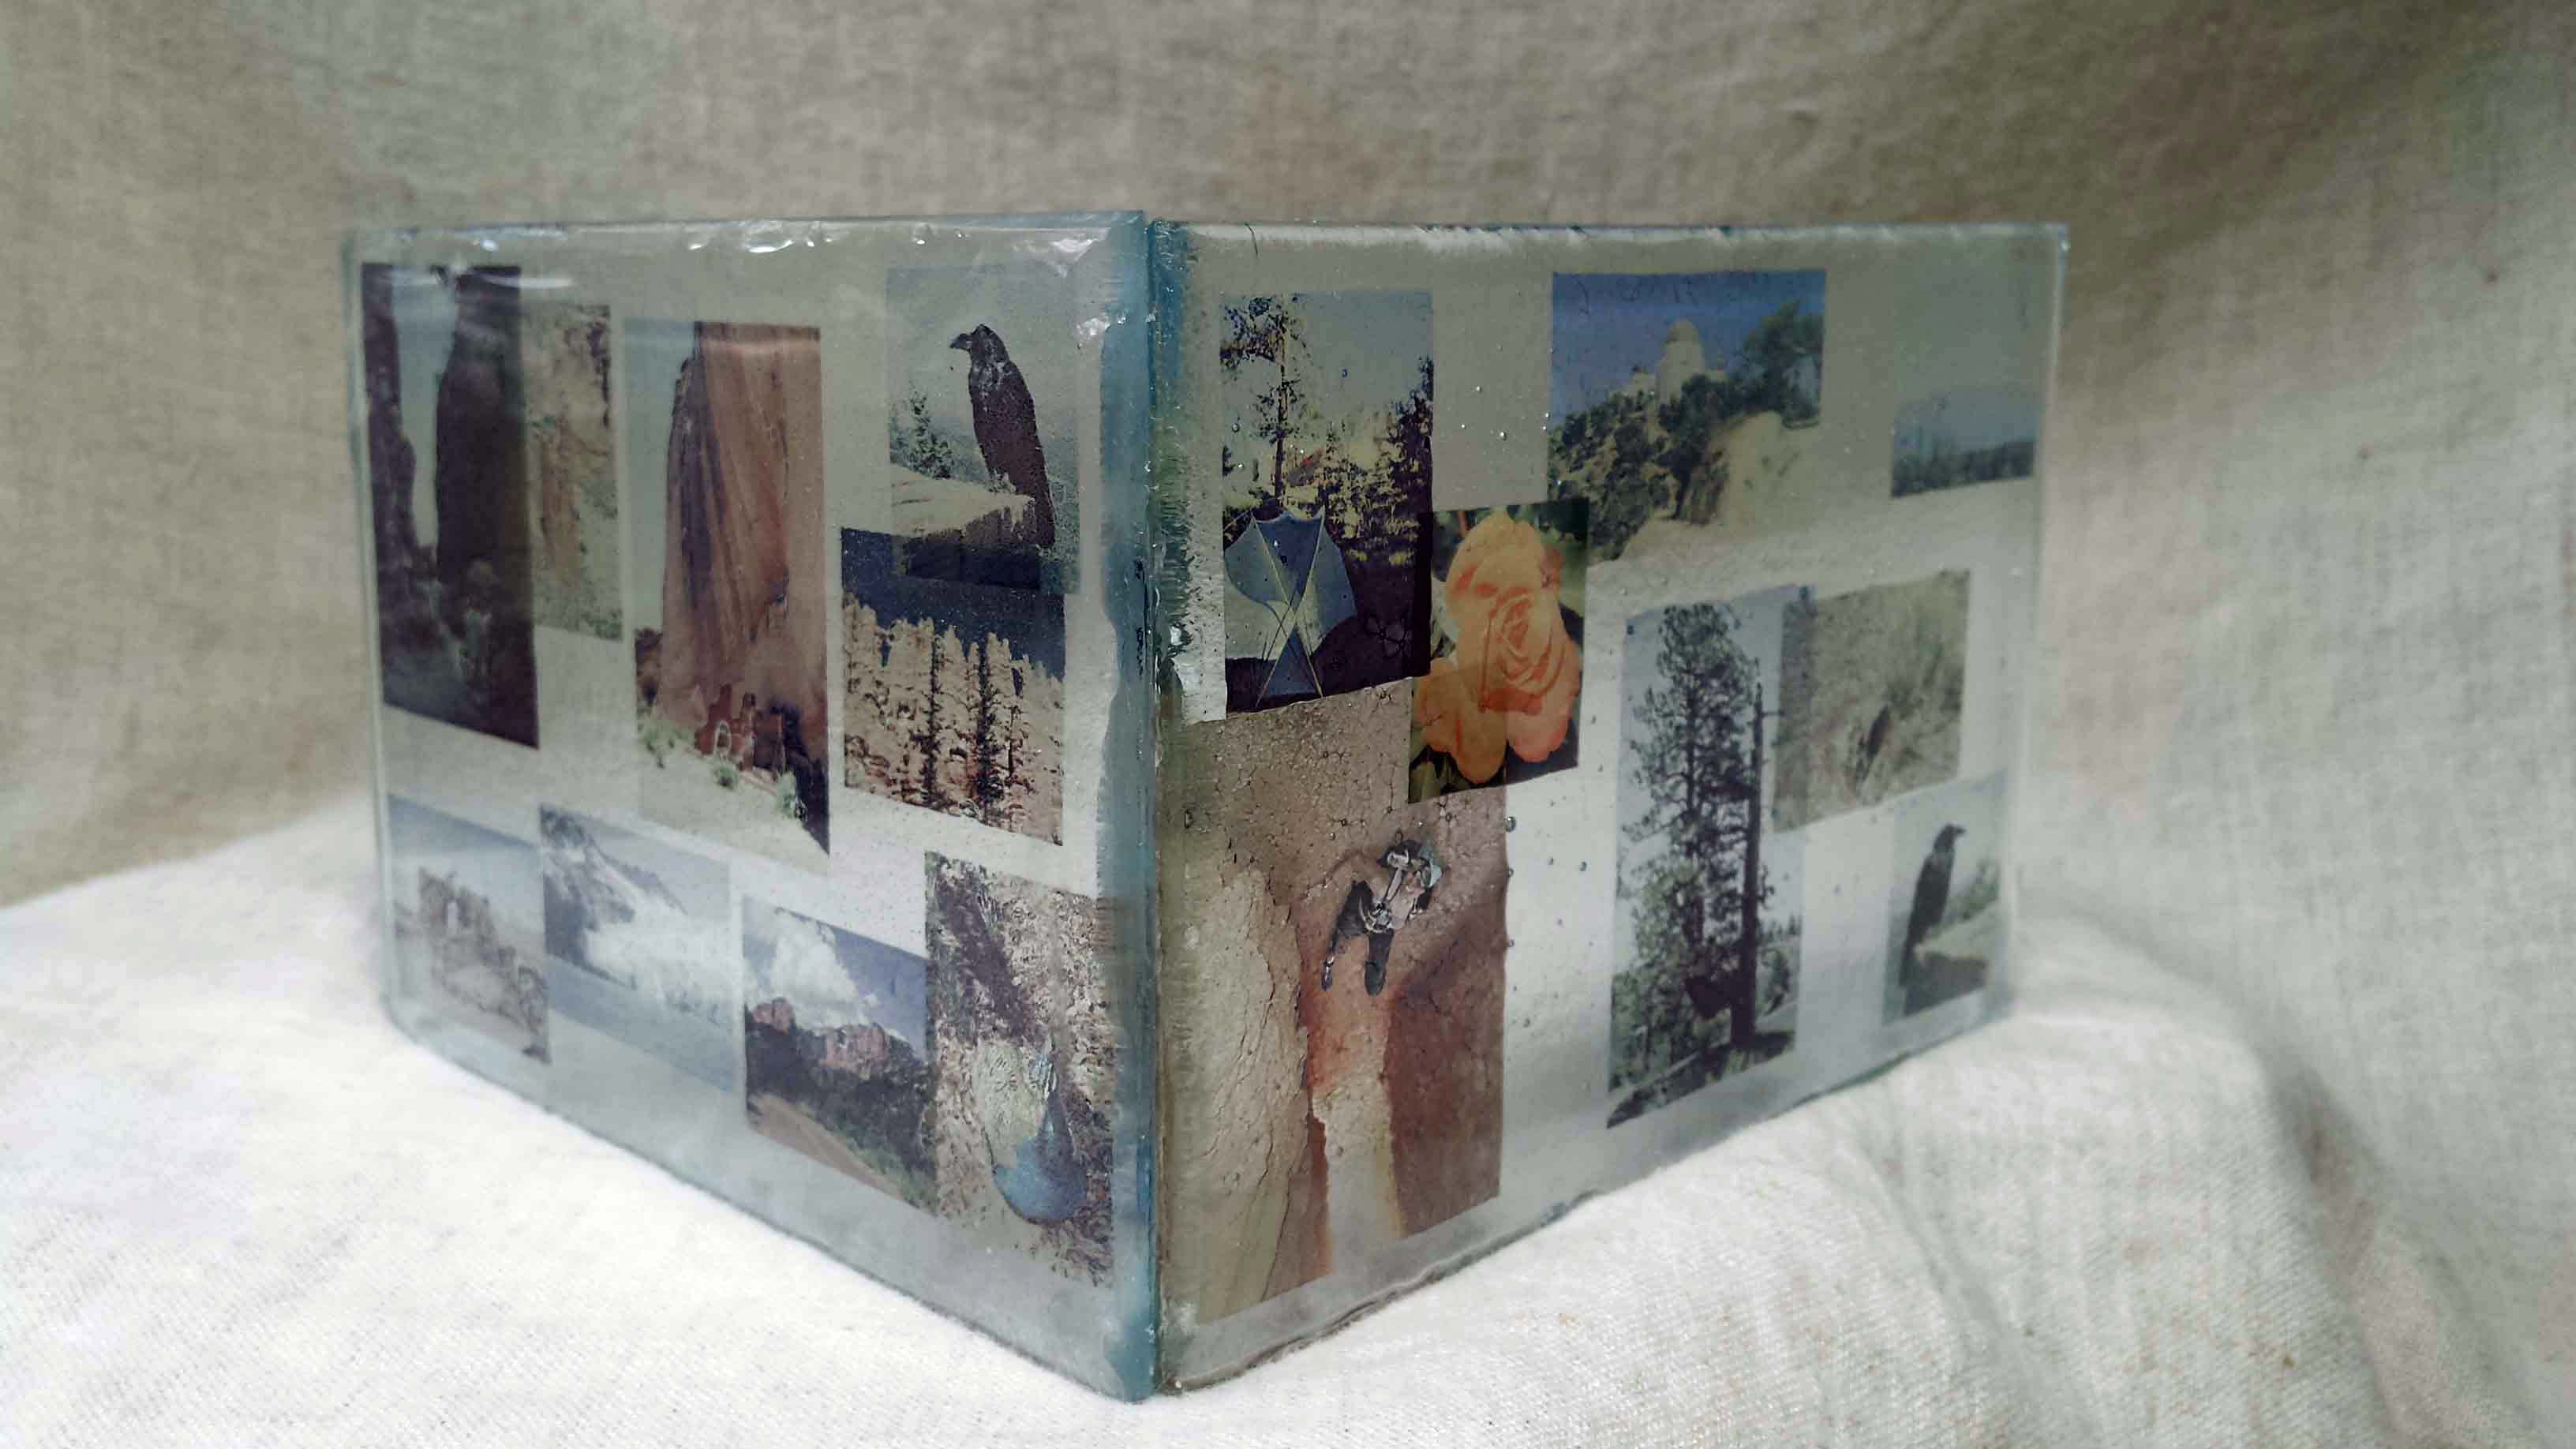 Transparent enamel photos embedded in layers of glass